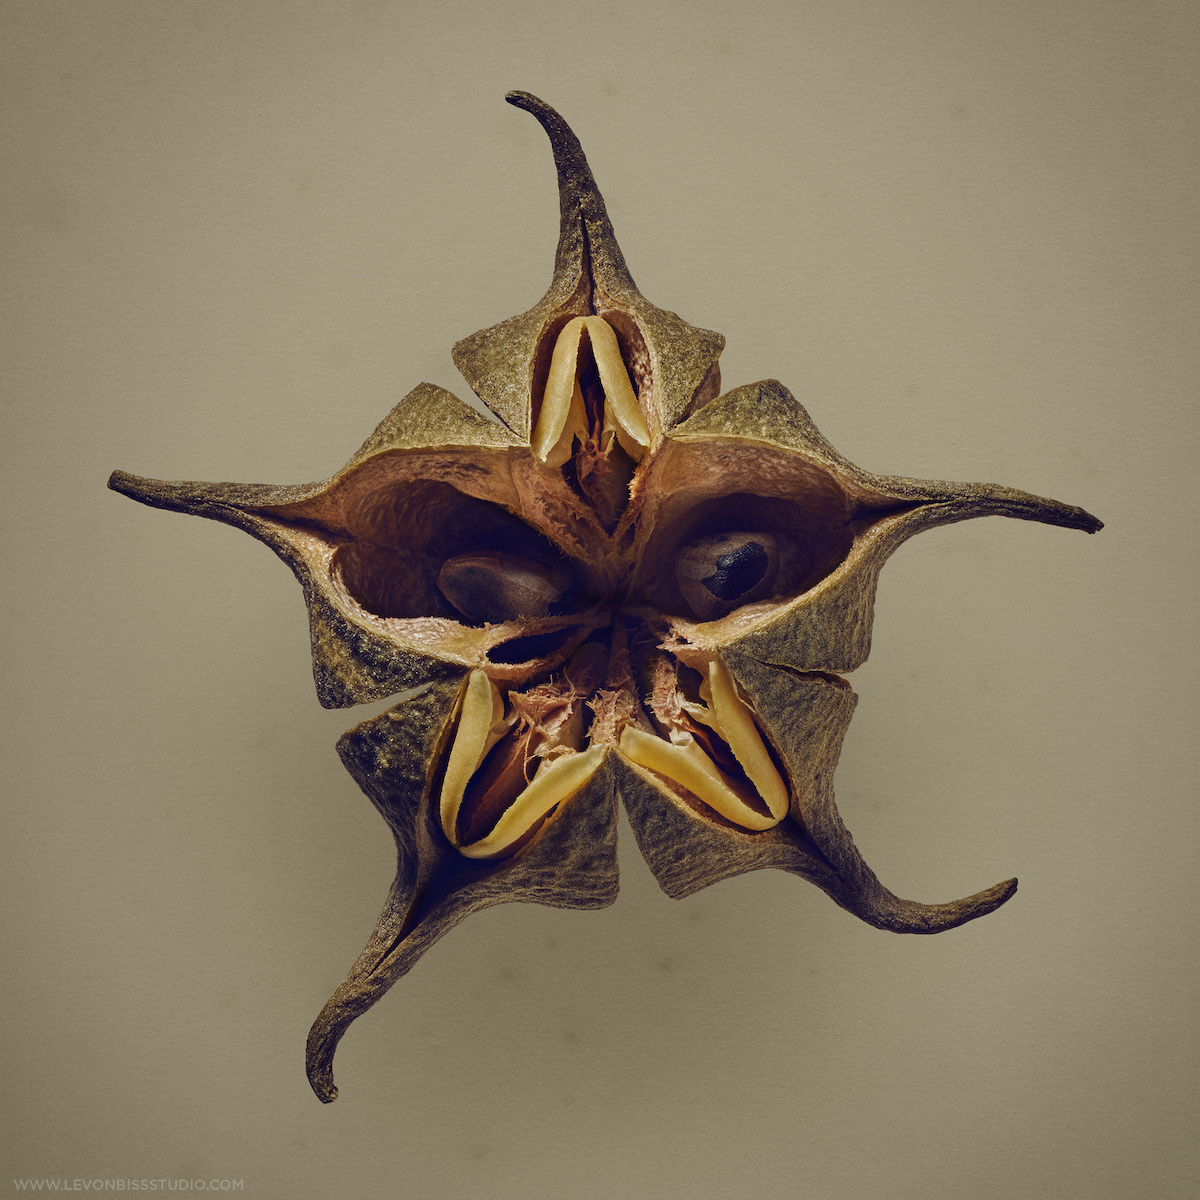 Photographs of the Carpological collection at the Royal Botanic Gardens in Edinburgh